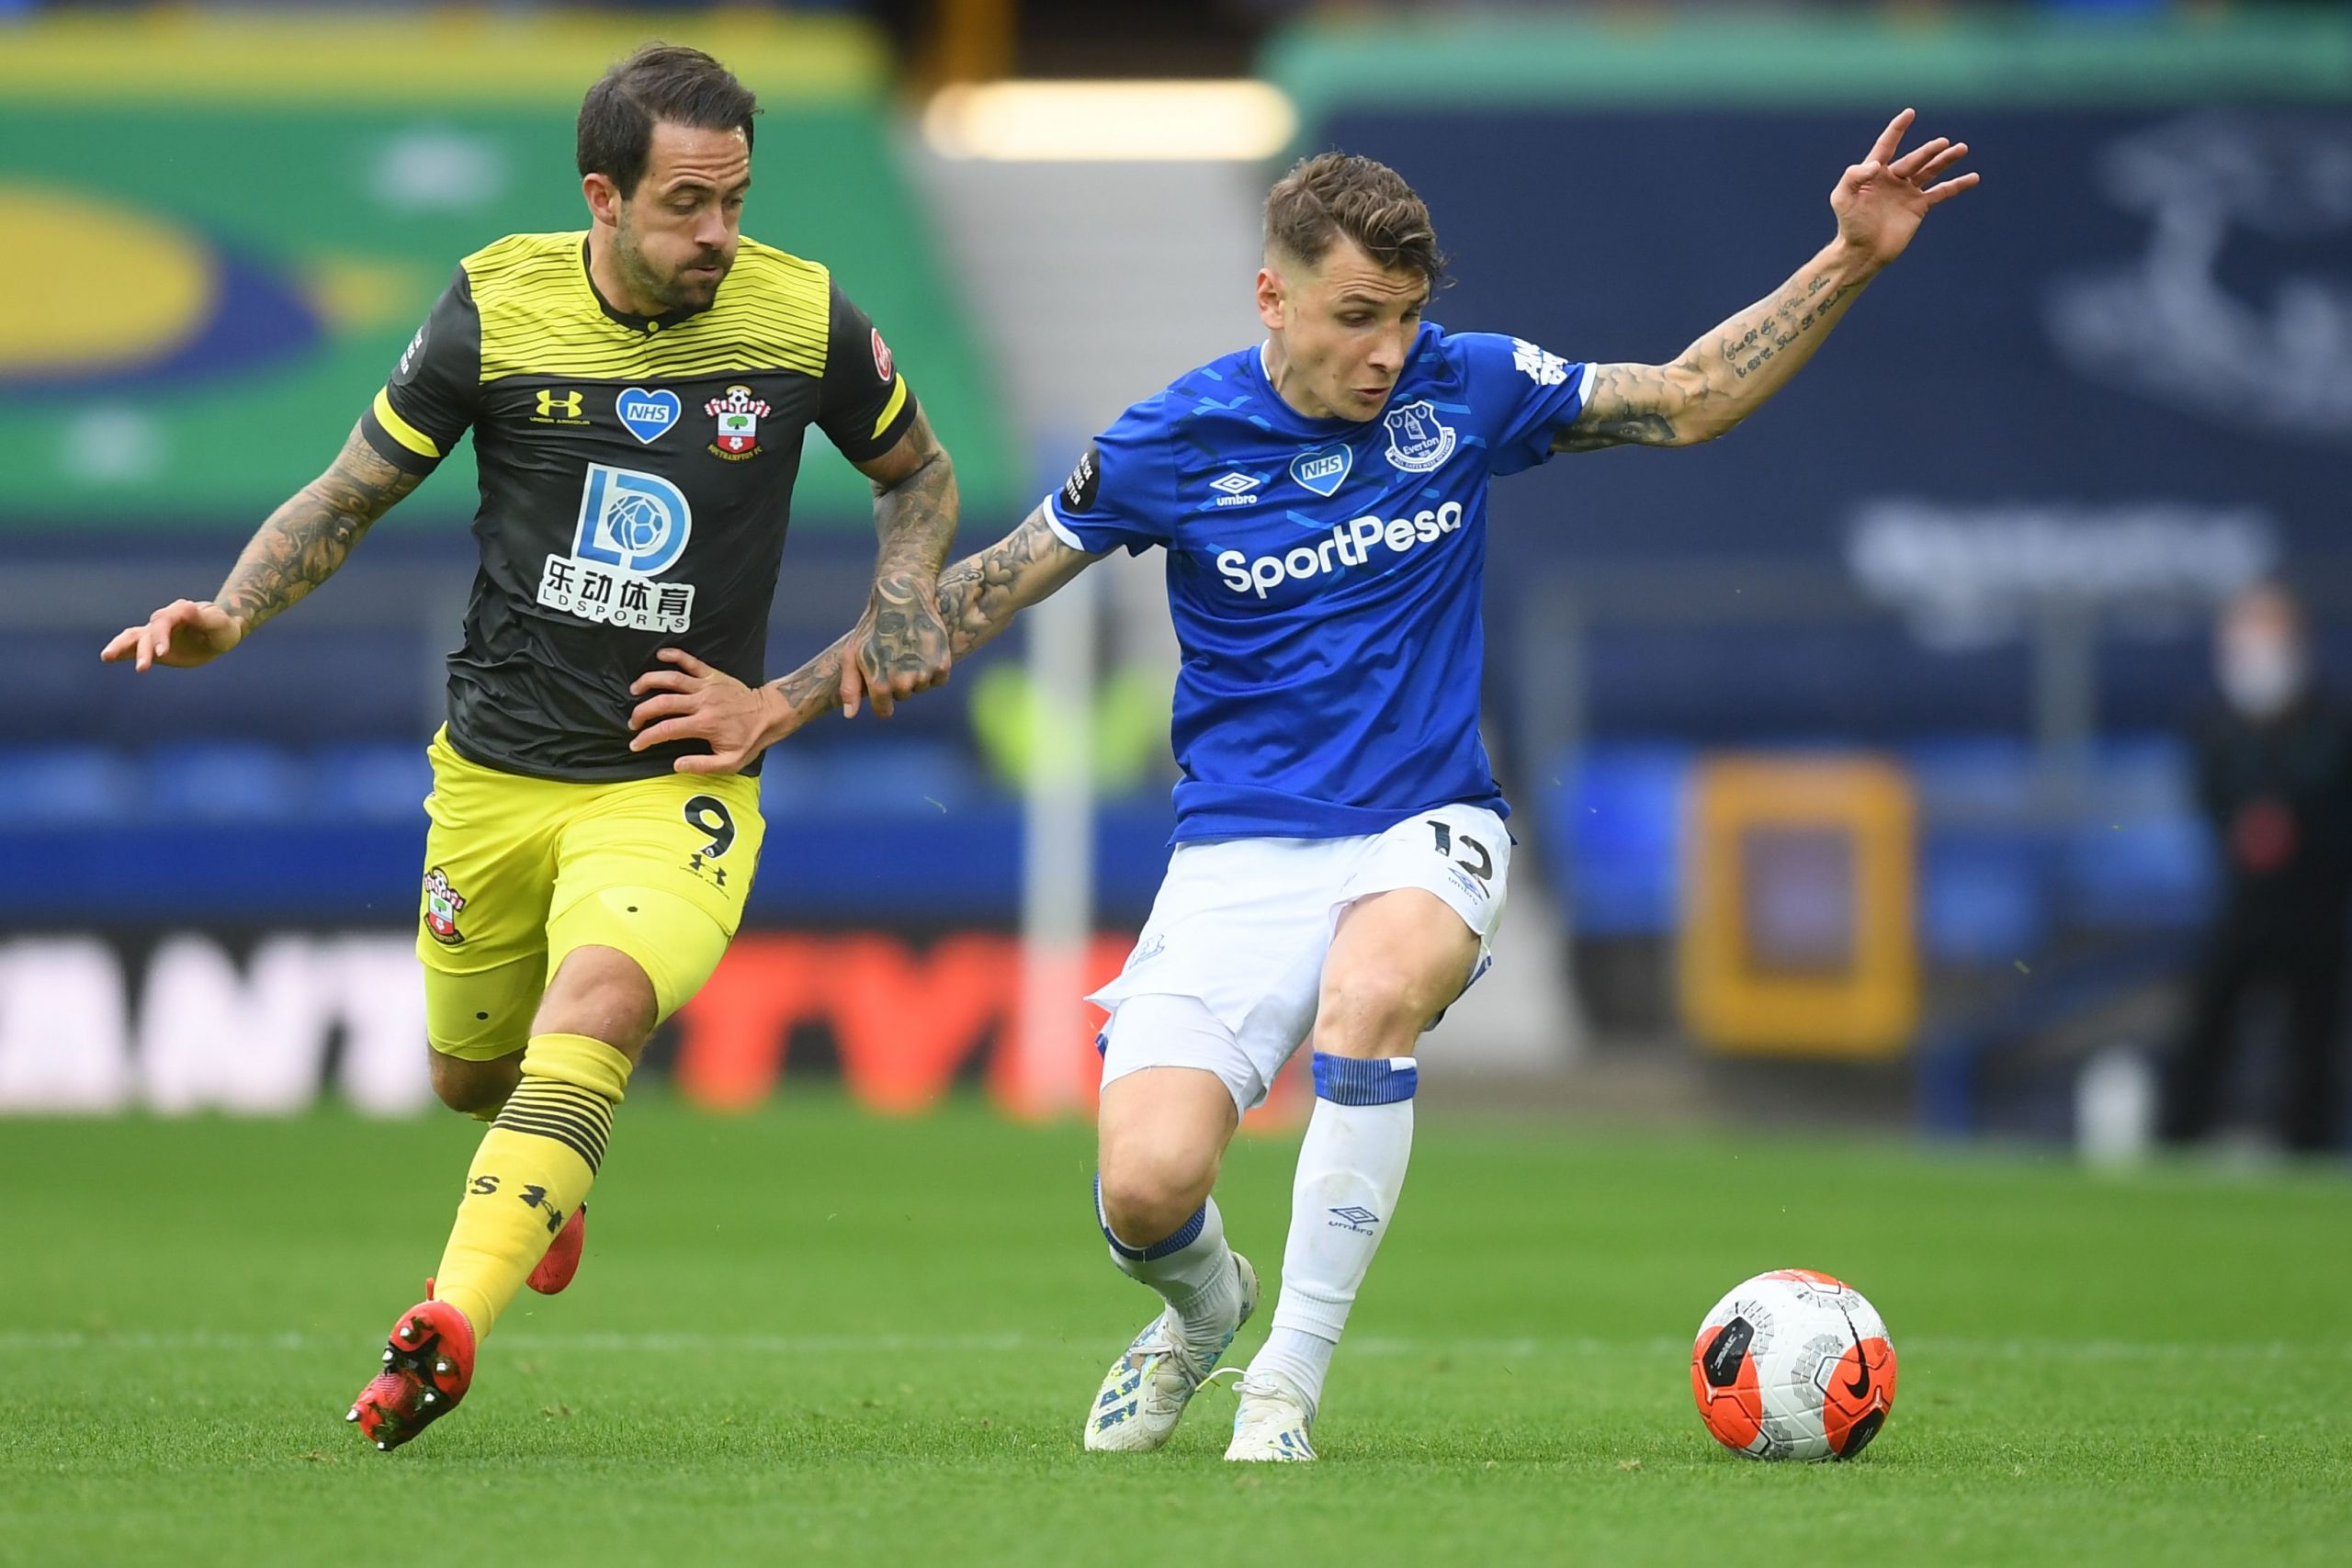 Everton full-back Lucas Digne is on Manchester City's radar (Everton's Lucas Digne is in action in the picture)